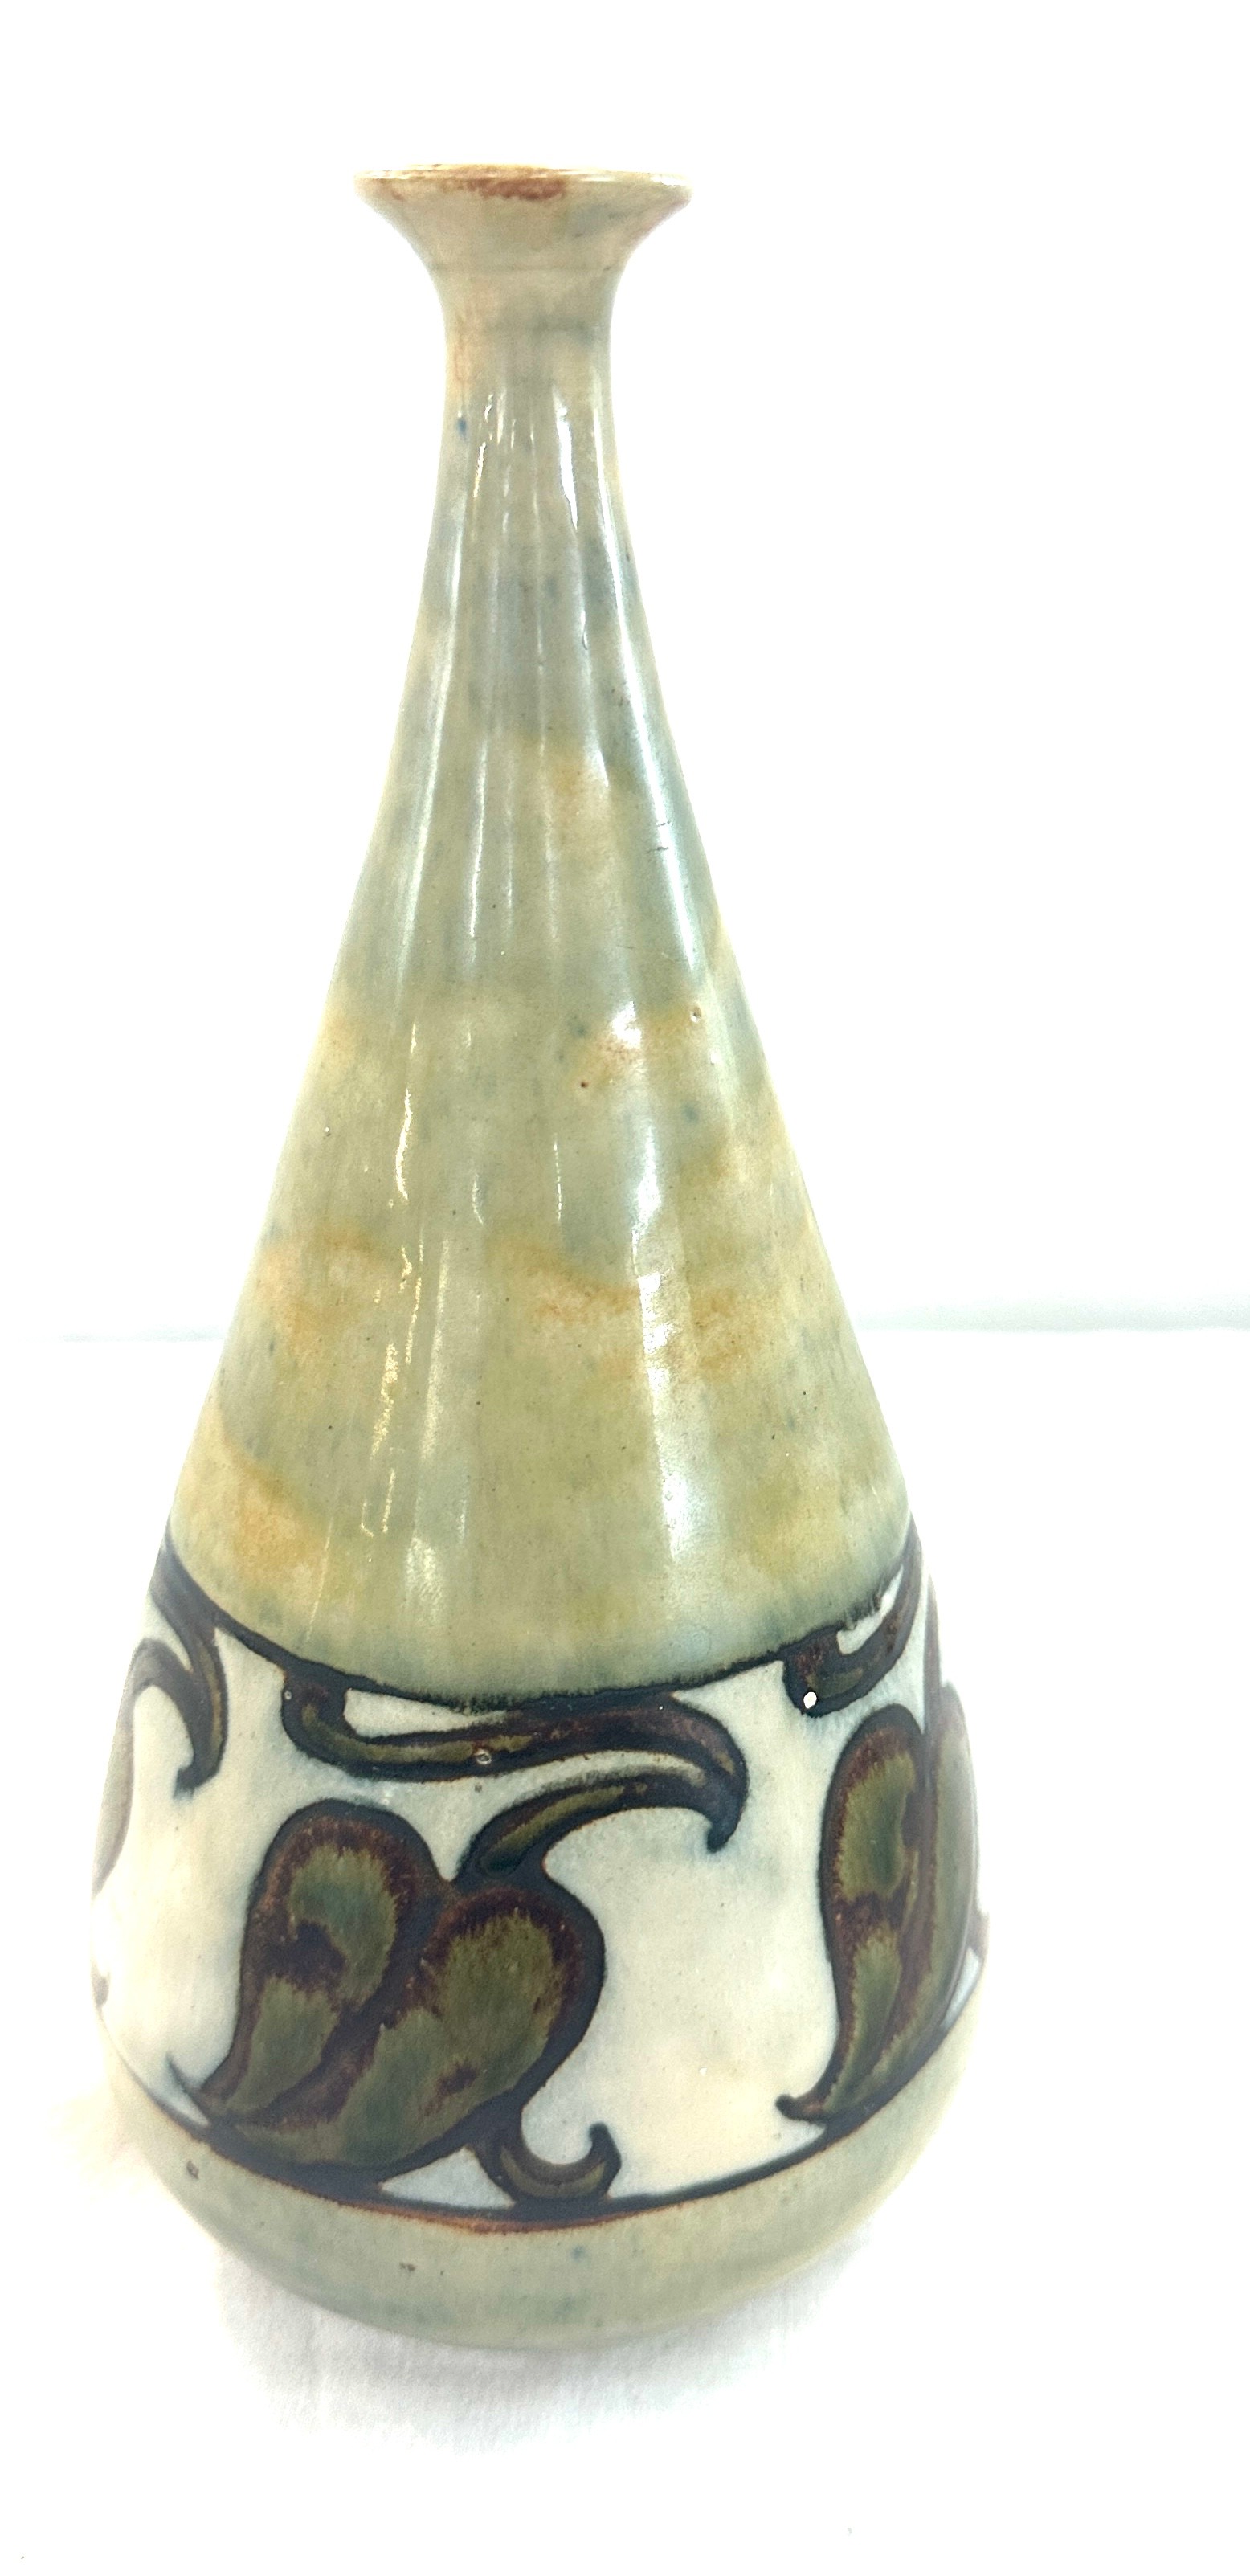 Royal Doulton stoneware vase measures approx 9 inches tall